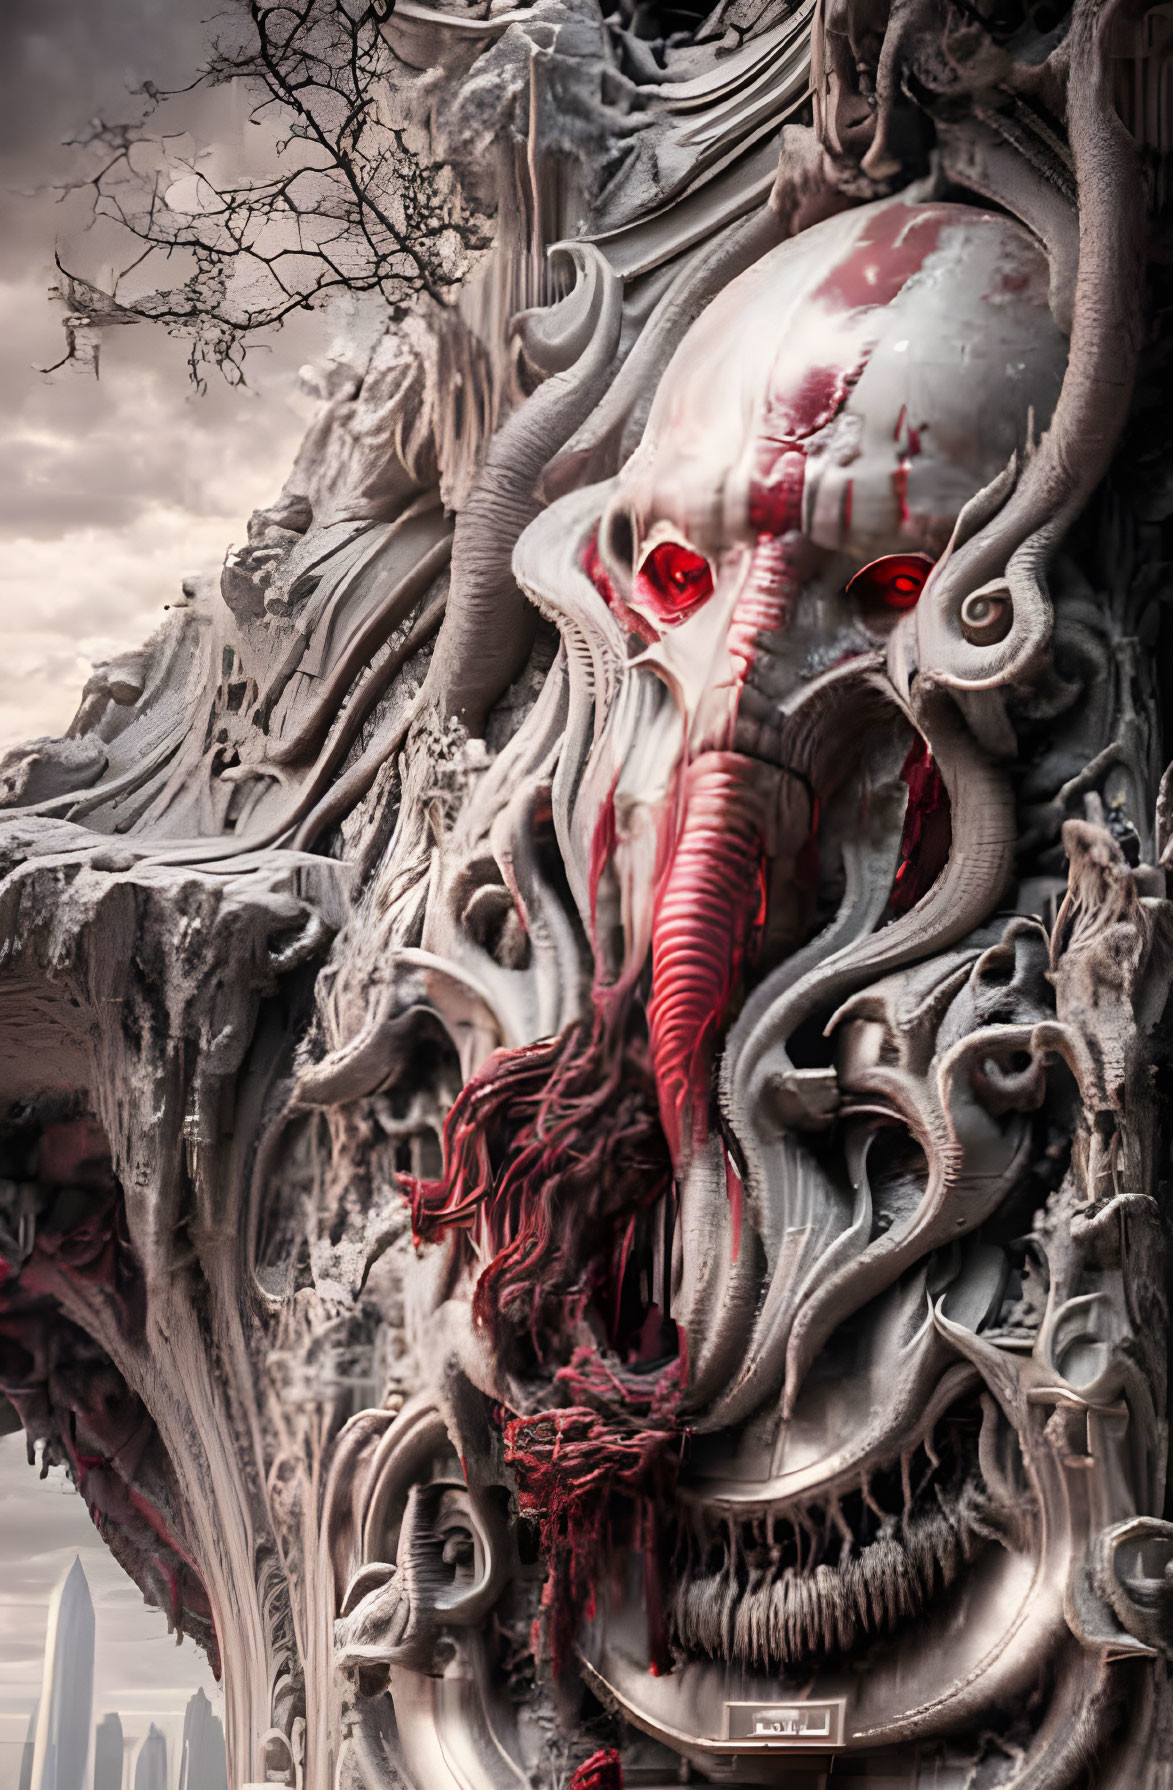 Detailed surreal artwork: elephant-like creature with red eyes and multiple snaking tusks in gothic setting